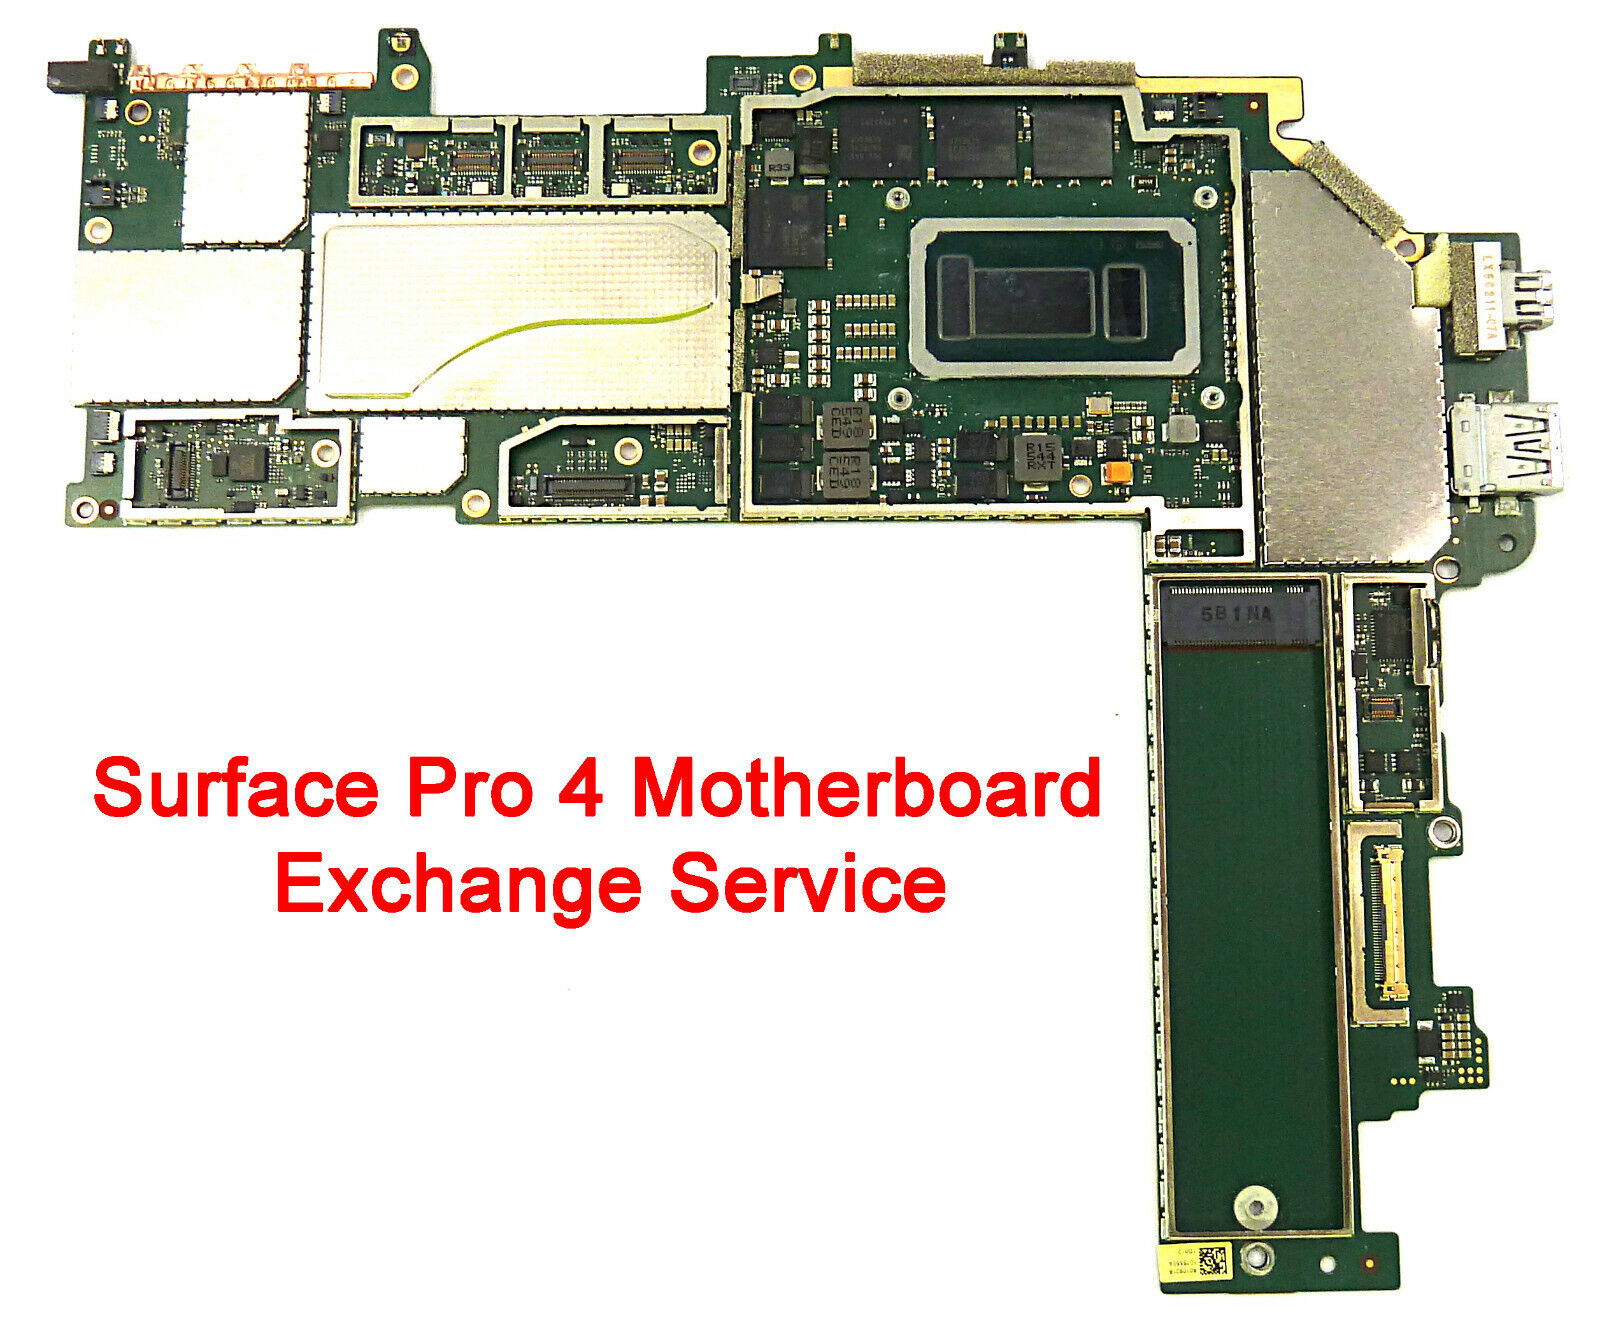 Microsoft Surface Pro 4 1724 i7 2.2Ghz 8GB Motherboard Exchange Service